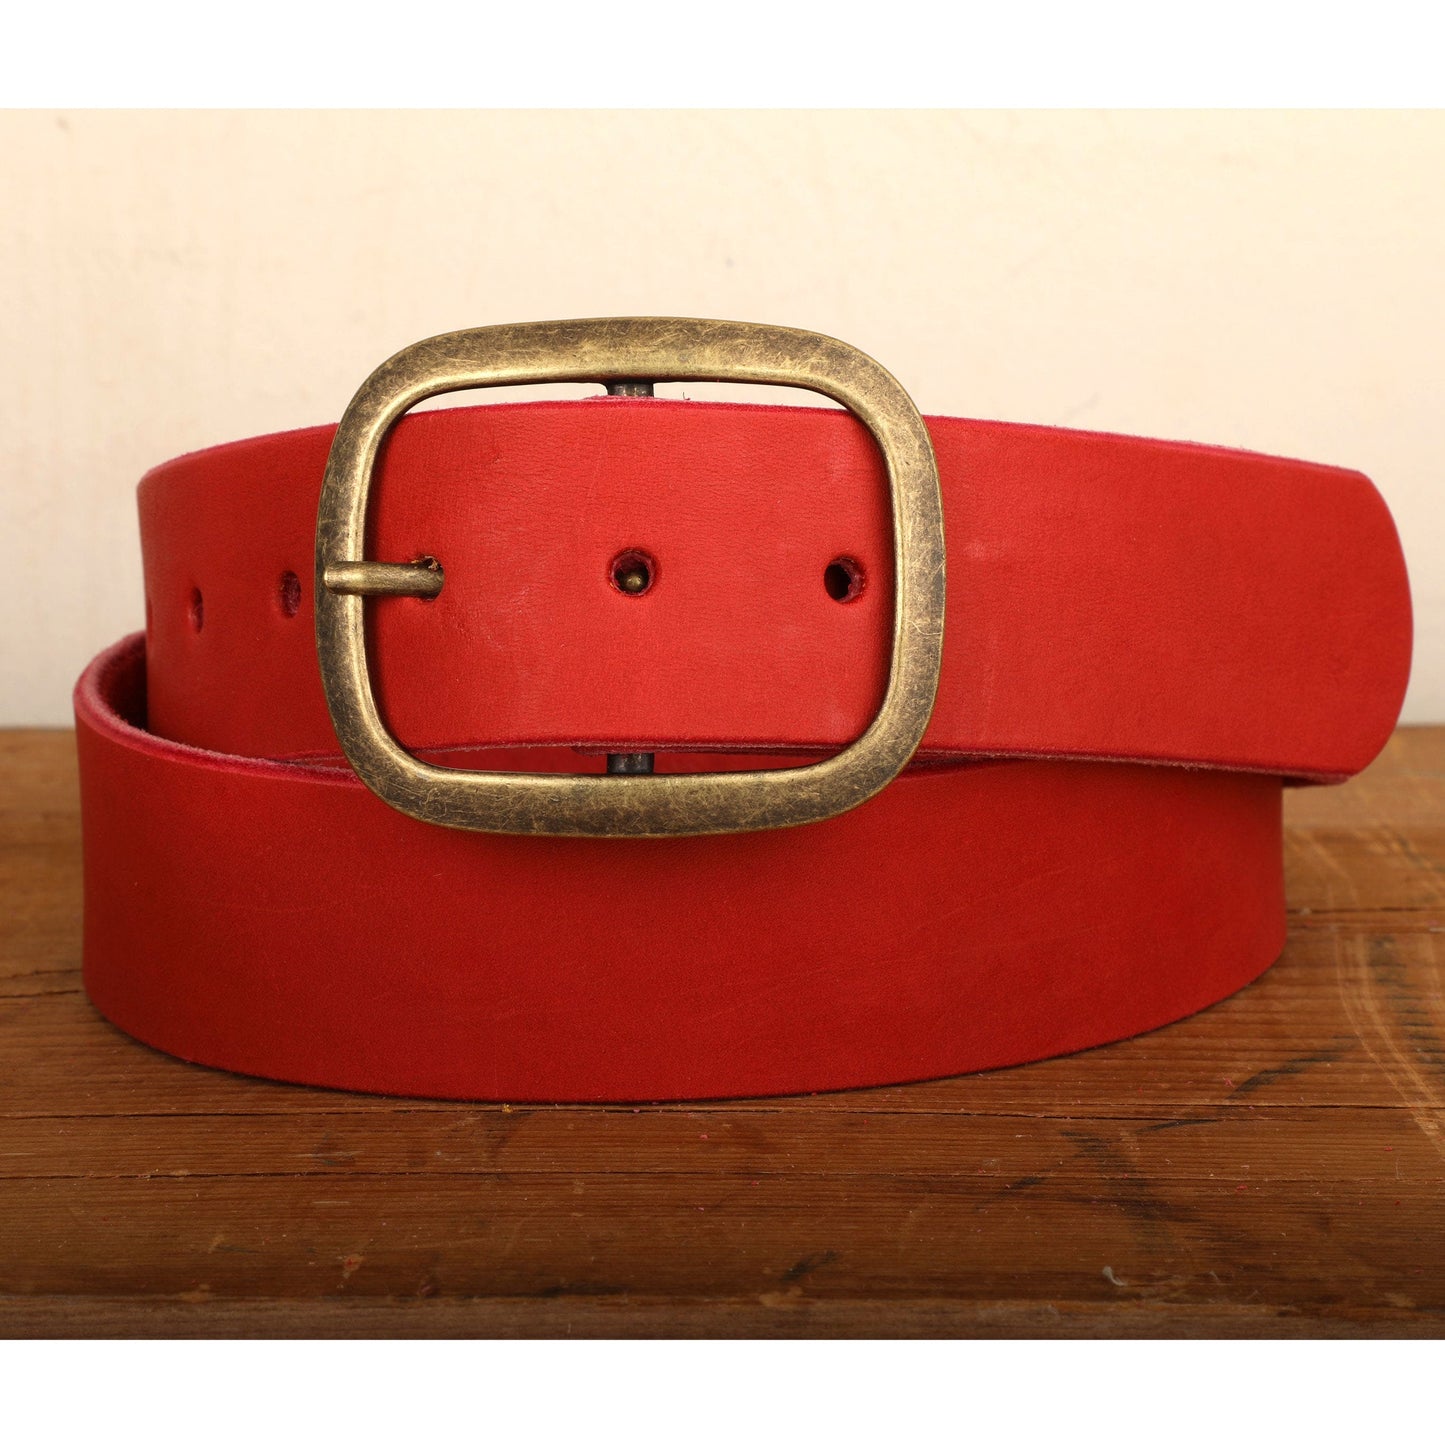 a red belt with a gold buckle on a wooden table